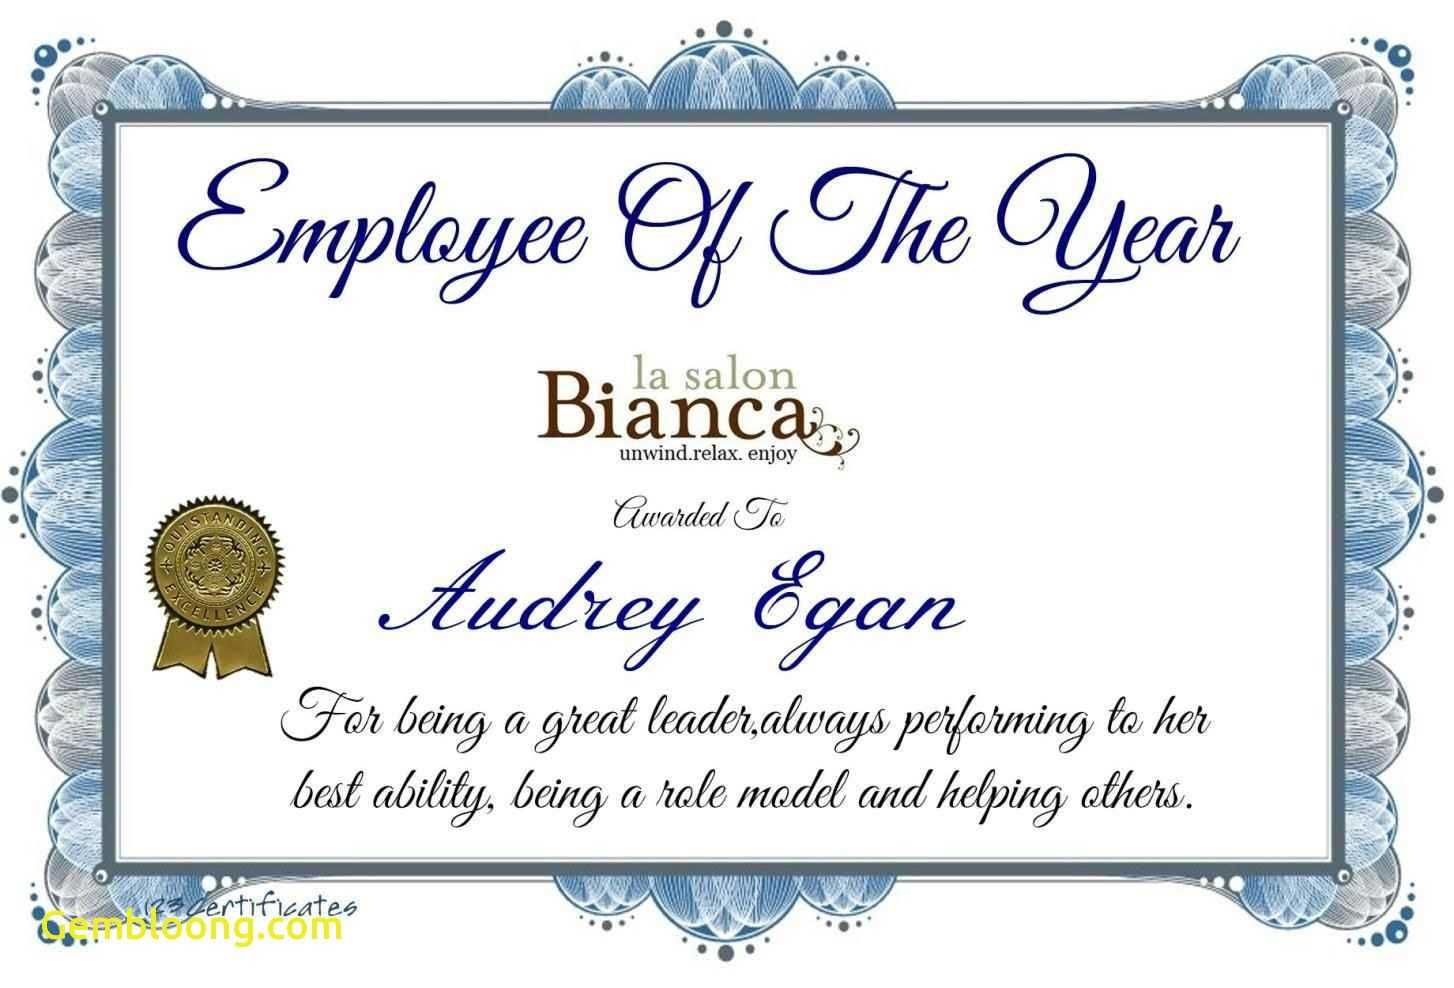 Employee Of The Year Certificate Template Update234 Com Inside Best Employee Award Certificate Templates